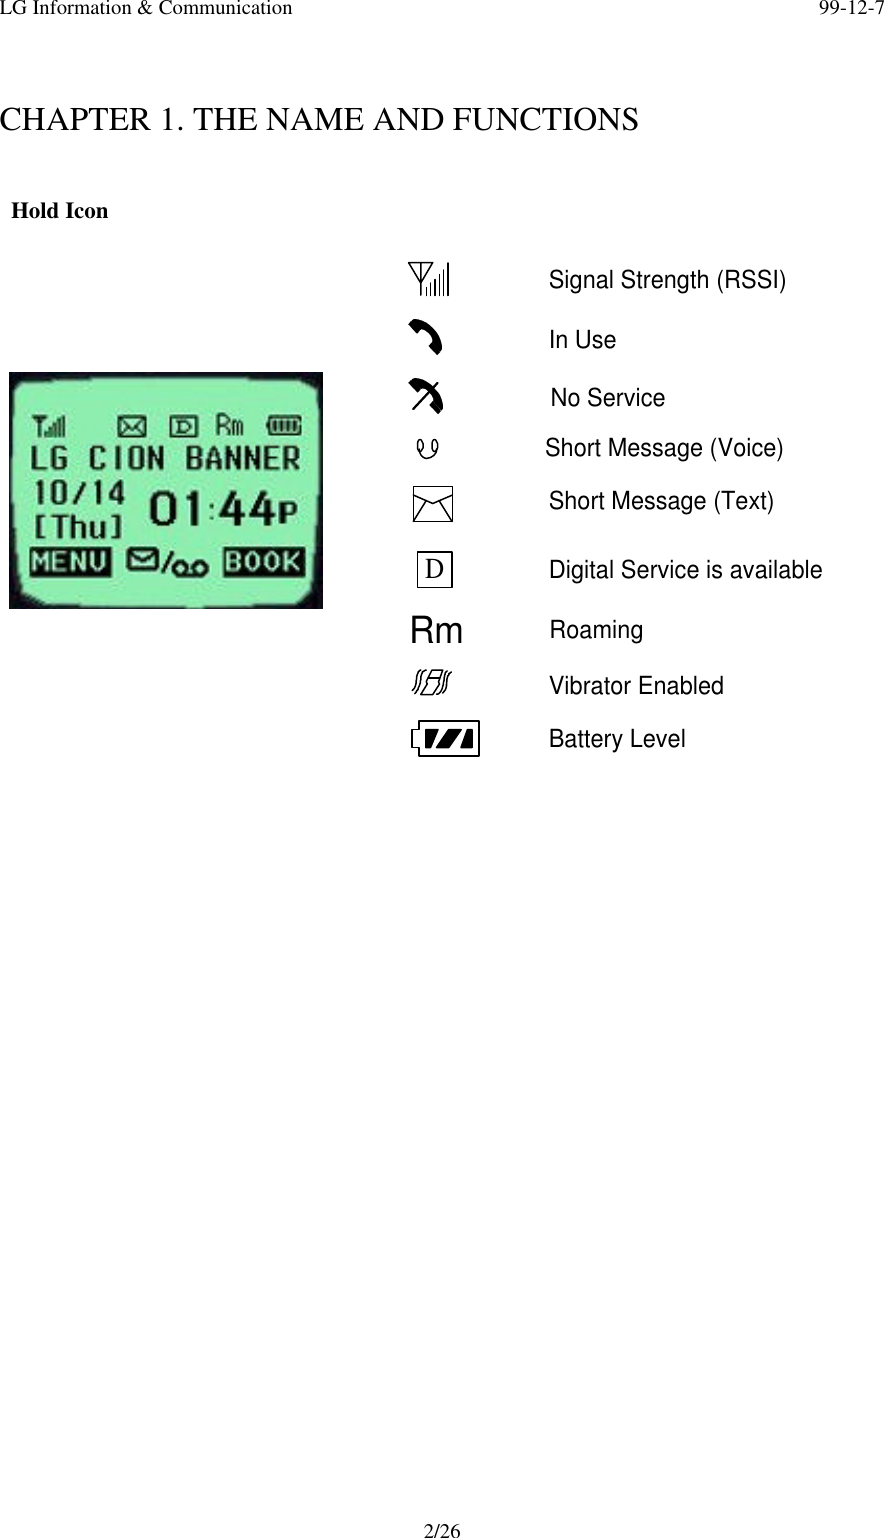 LG Information &amp; Communication 99-12-72/26CHAPTER 1. THE NAME AND FUNCTIONS Hold IconRmSignal Strength (RSSI)In UseNo ServiceDigital Service is availableRoamingShort Message (Voice)Battery LevelShort Message (Text)Vibrator EnabledD